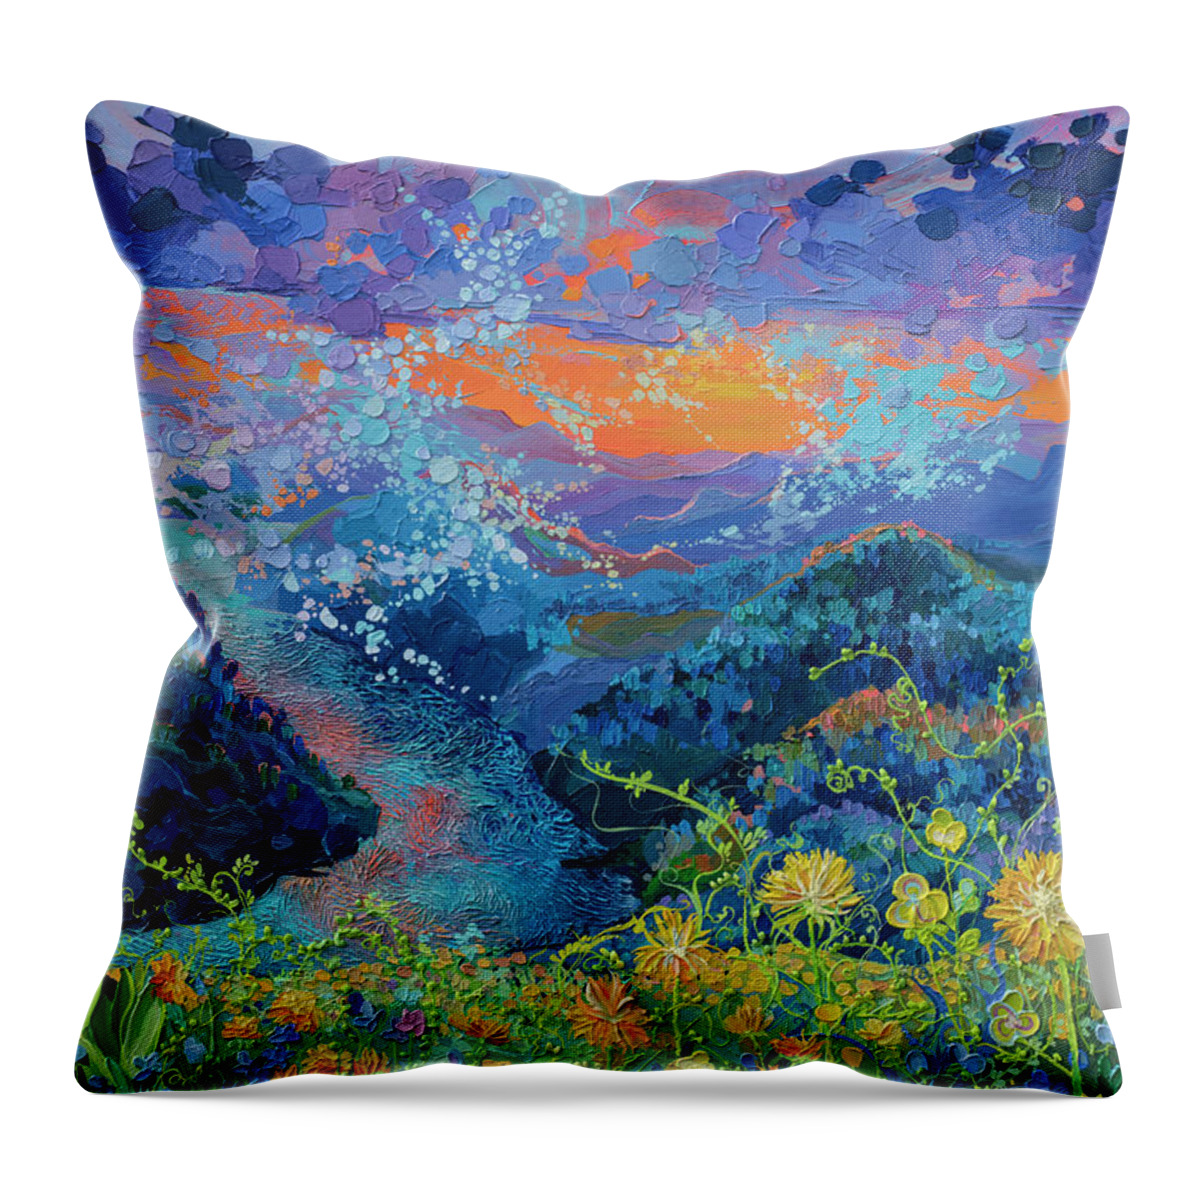 Landscape Throw Pillow featuring the painting Somewhere In Alsace by Anastasia Trusova